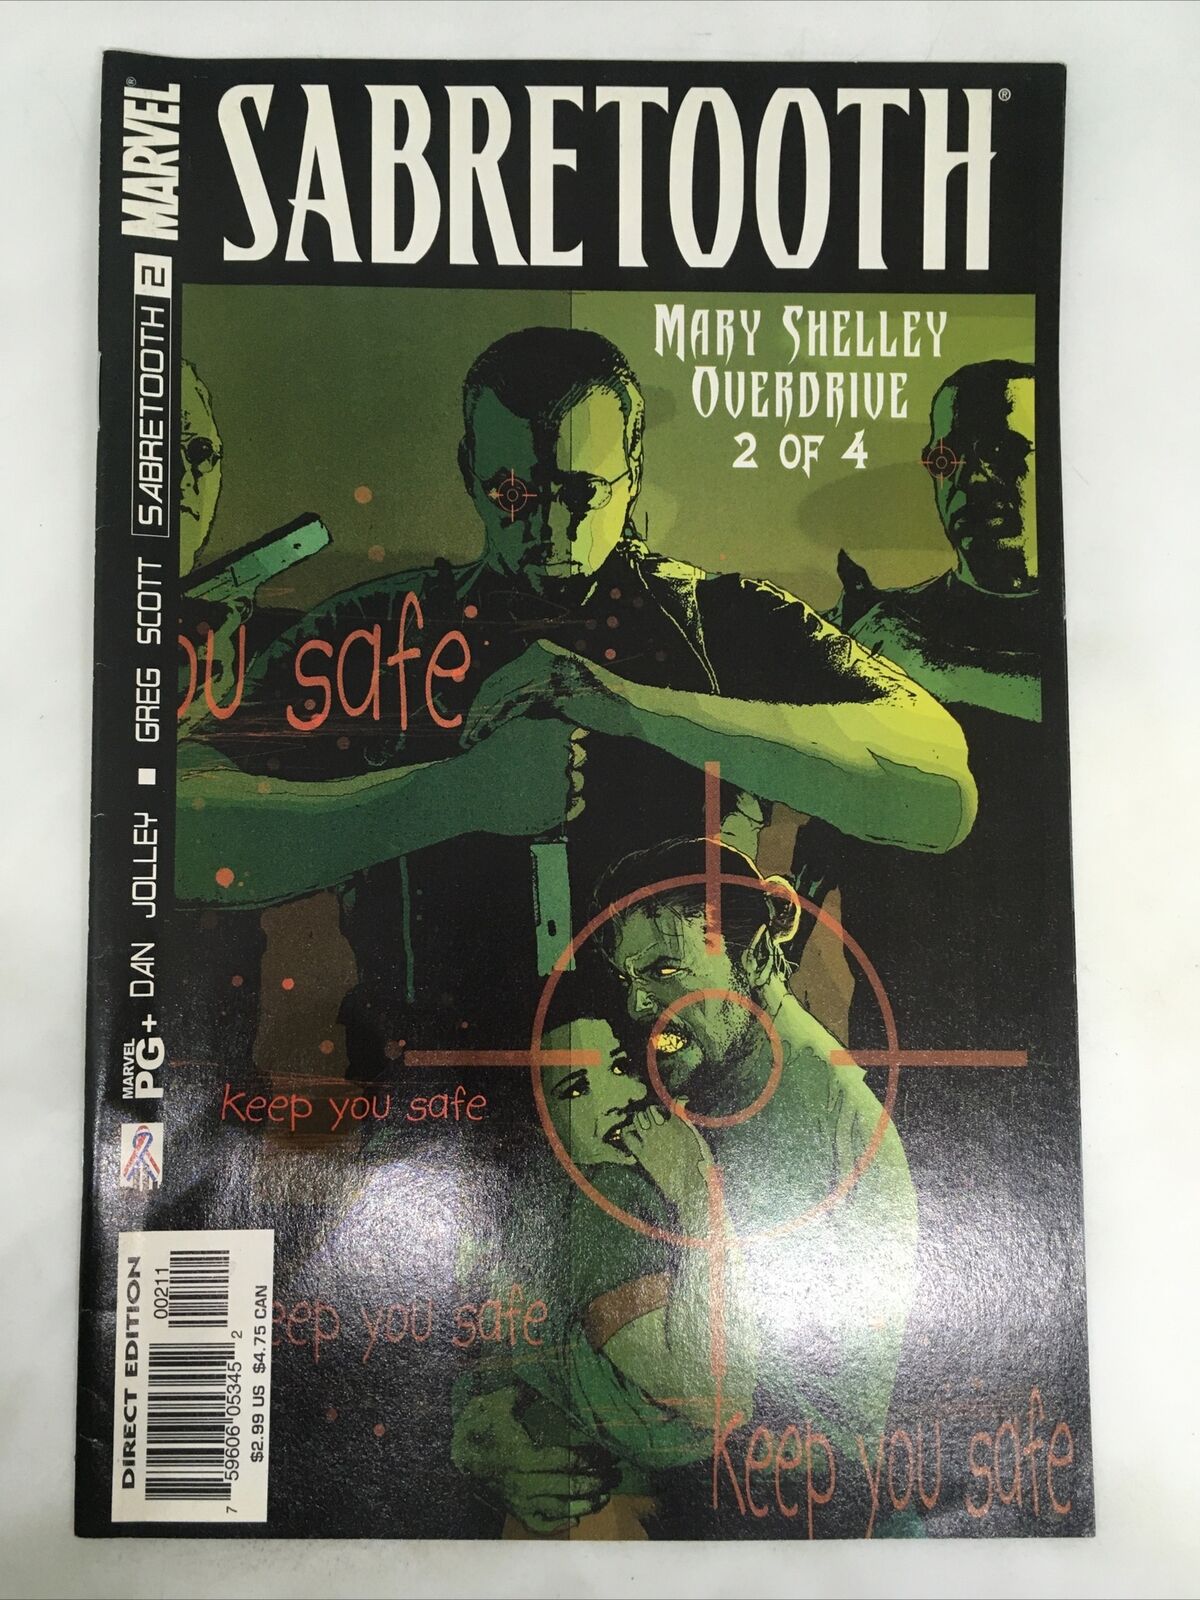 SABRETOOTH Mary Shelley Overdrive #2 MARVEL COMICS 2002